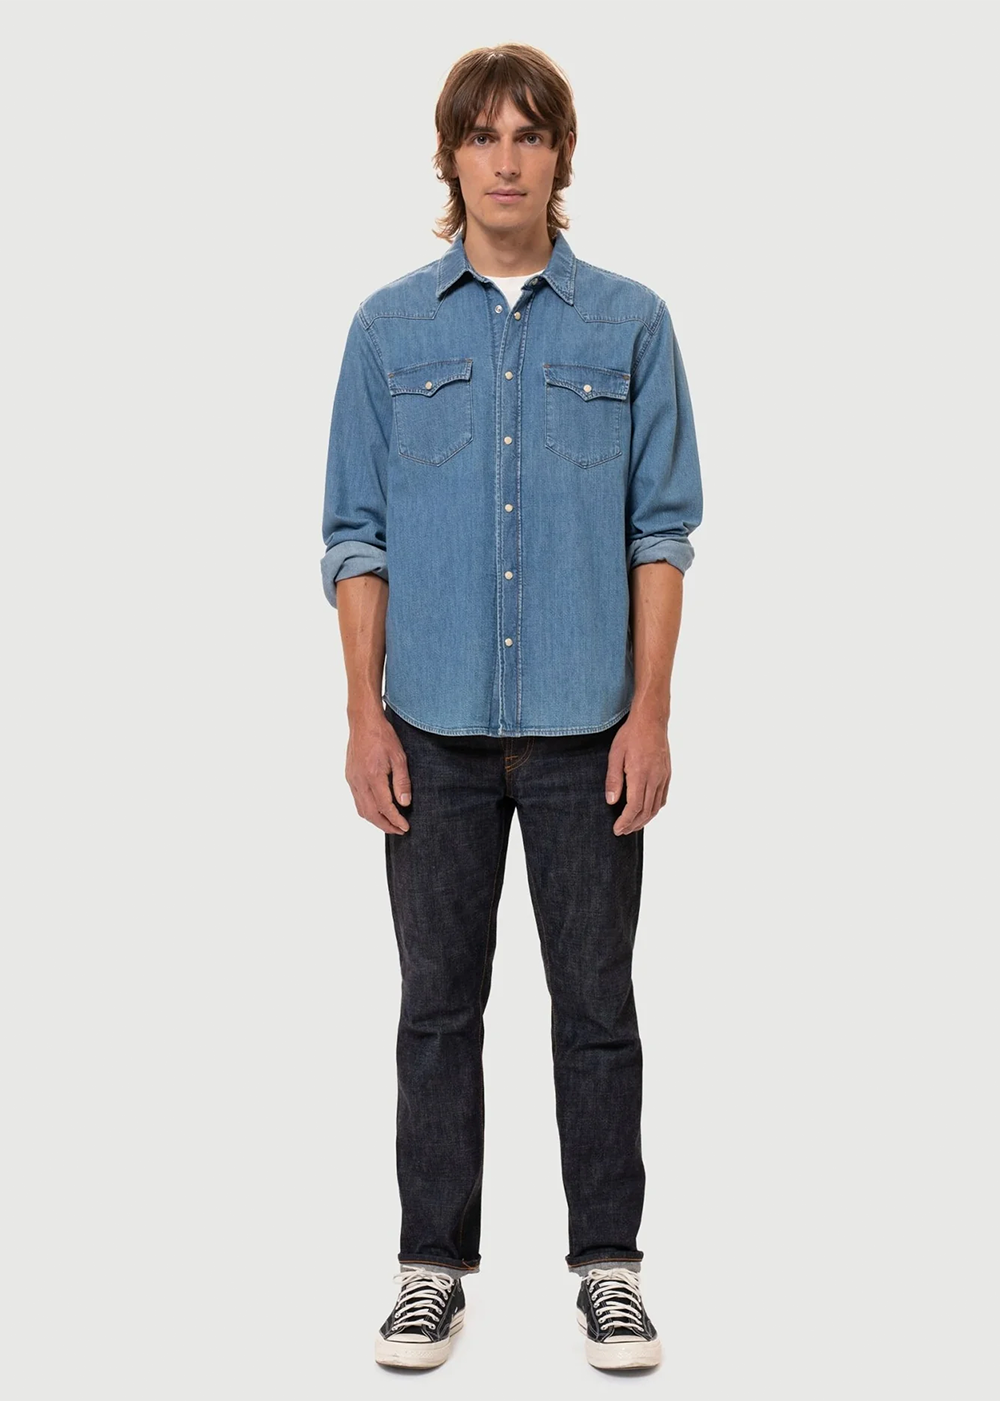 George Another Kind Of Blue Denim Shirt